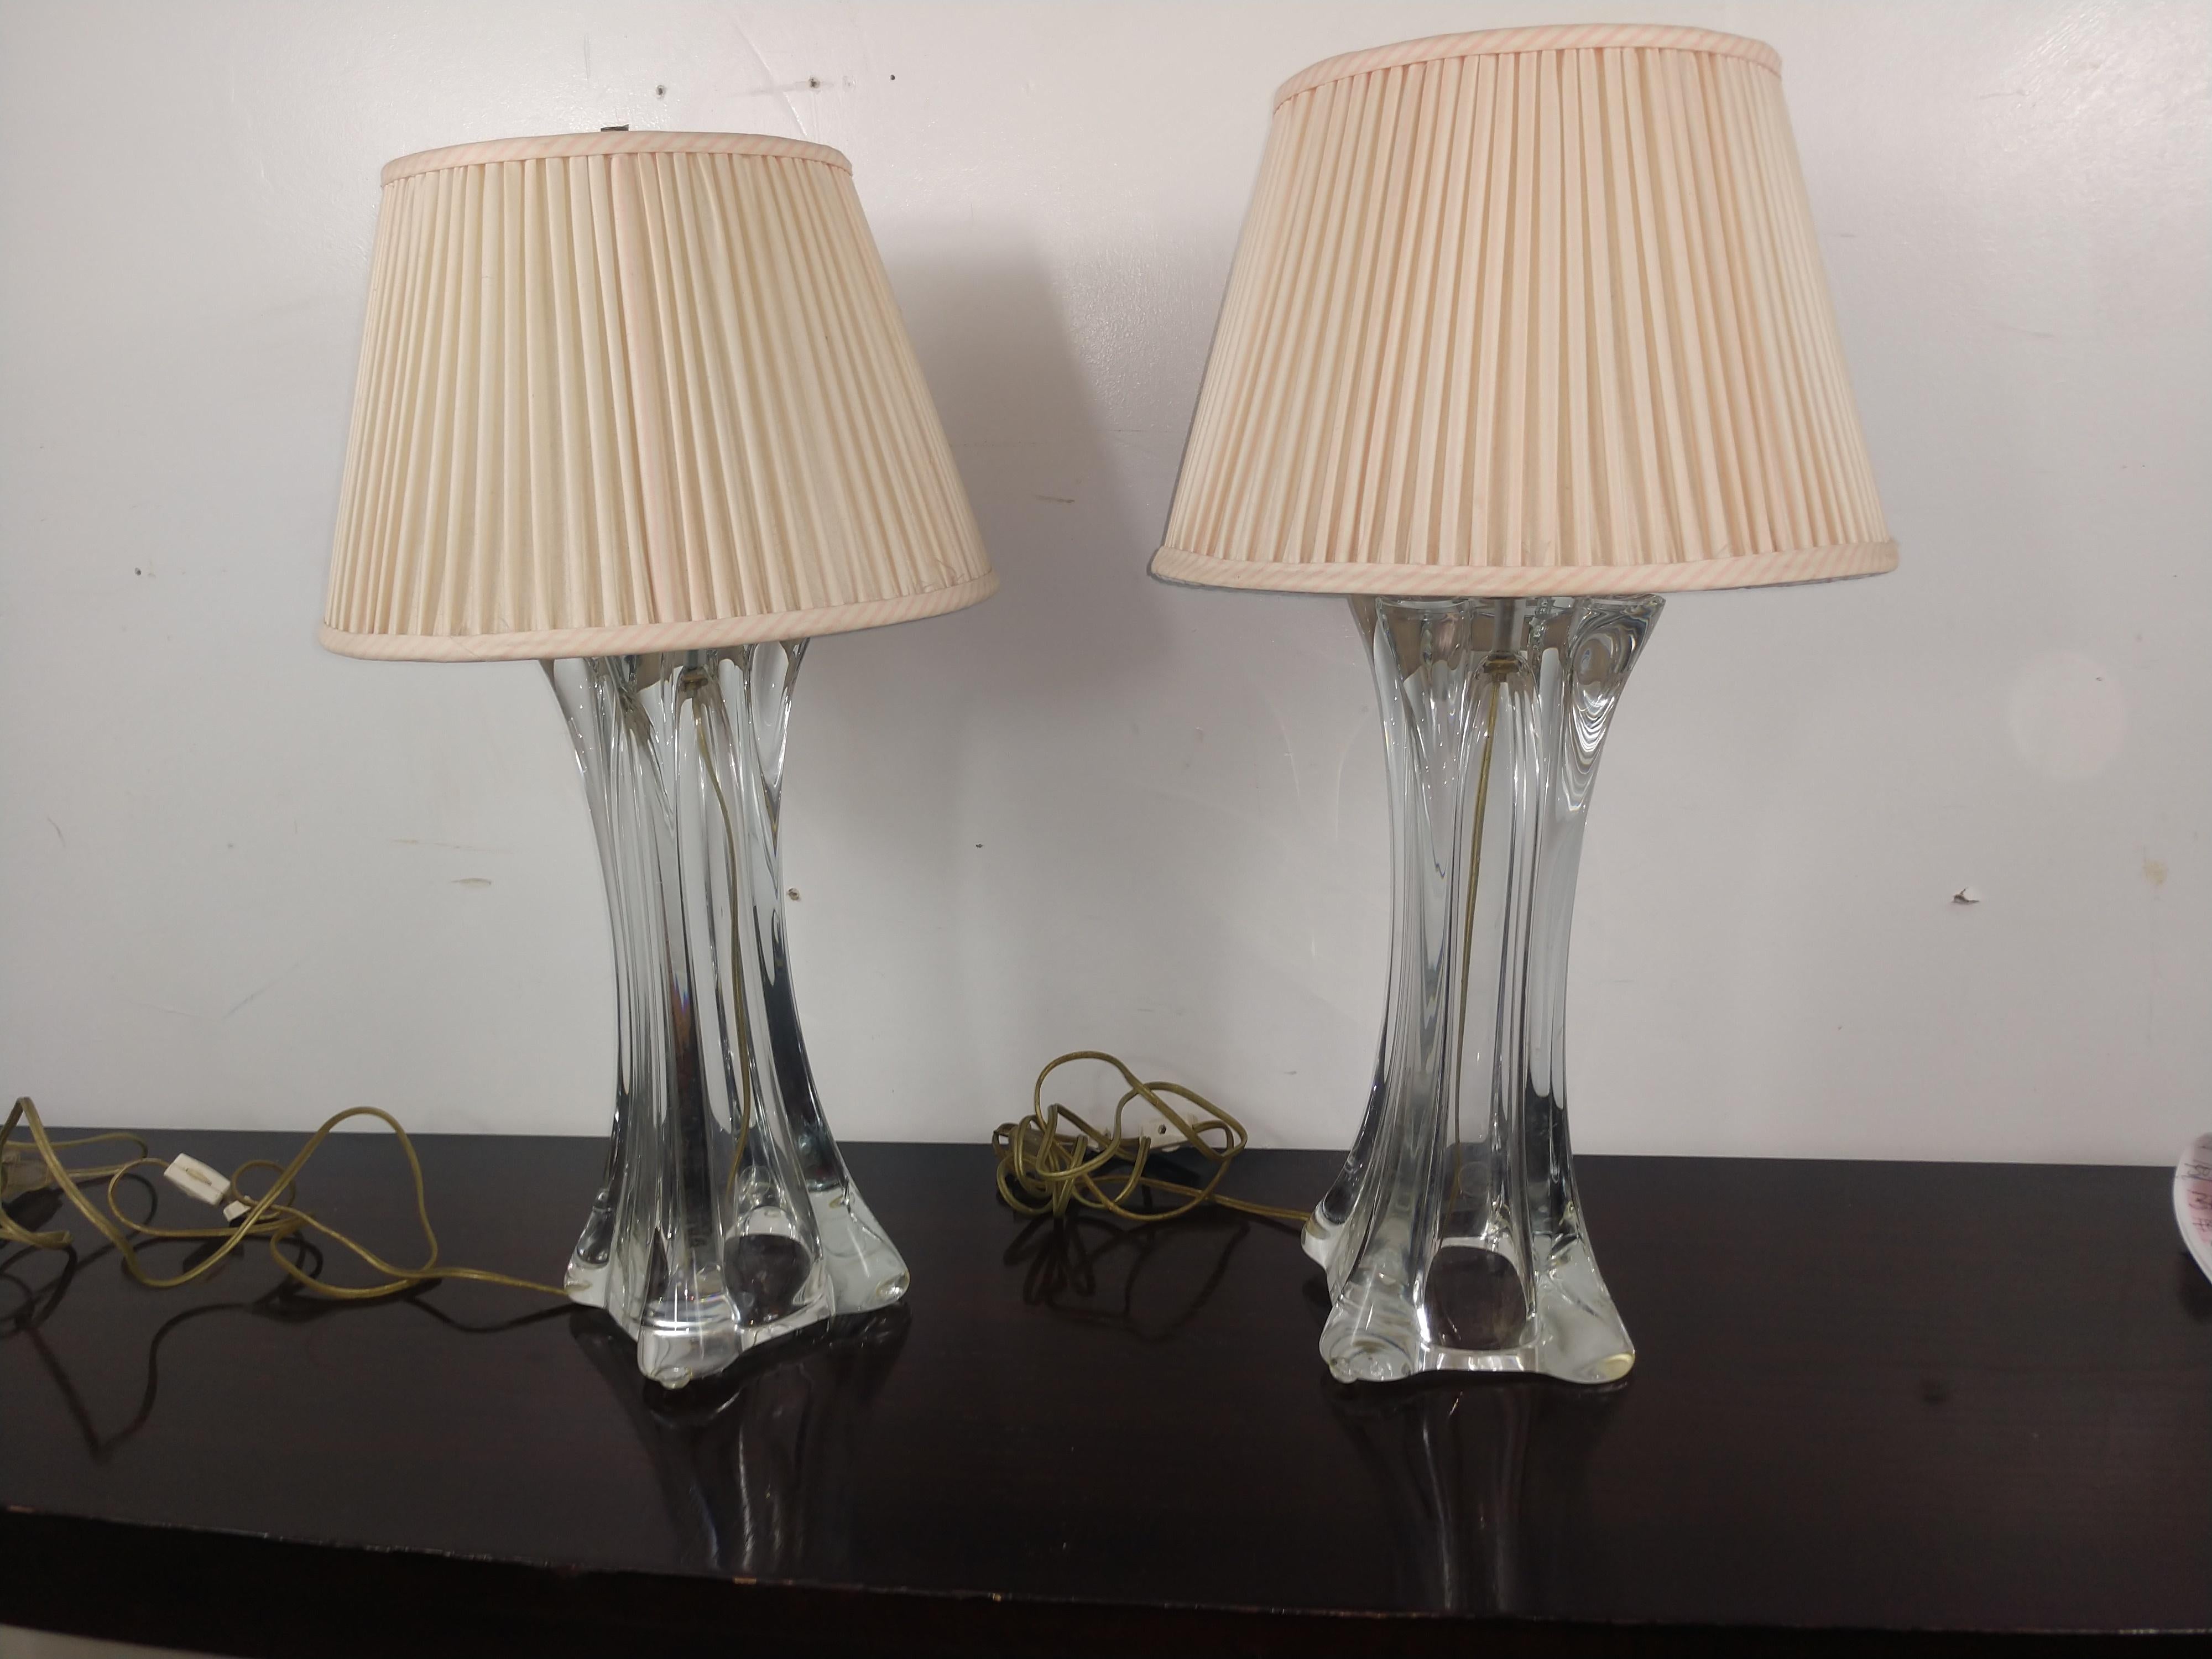 Pair of Mid-Century Modern French Blown Glass Table Lamps In Good Condition For Sale In Port Jervis, NY